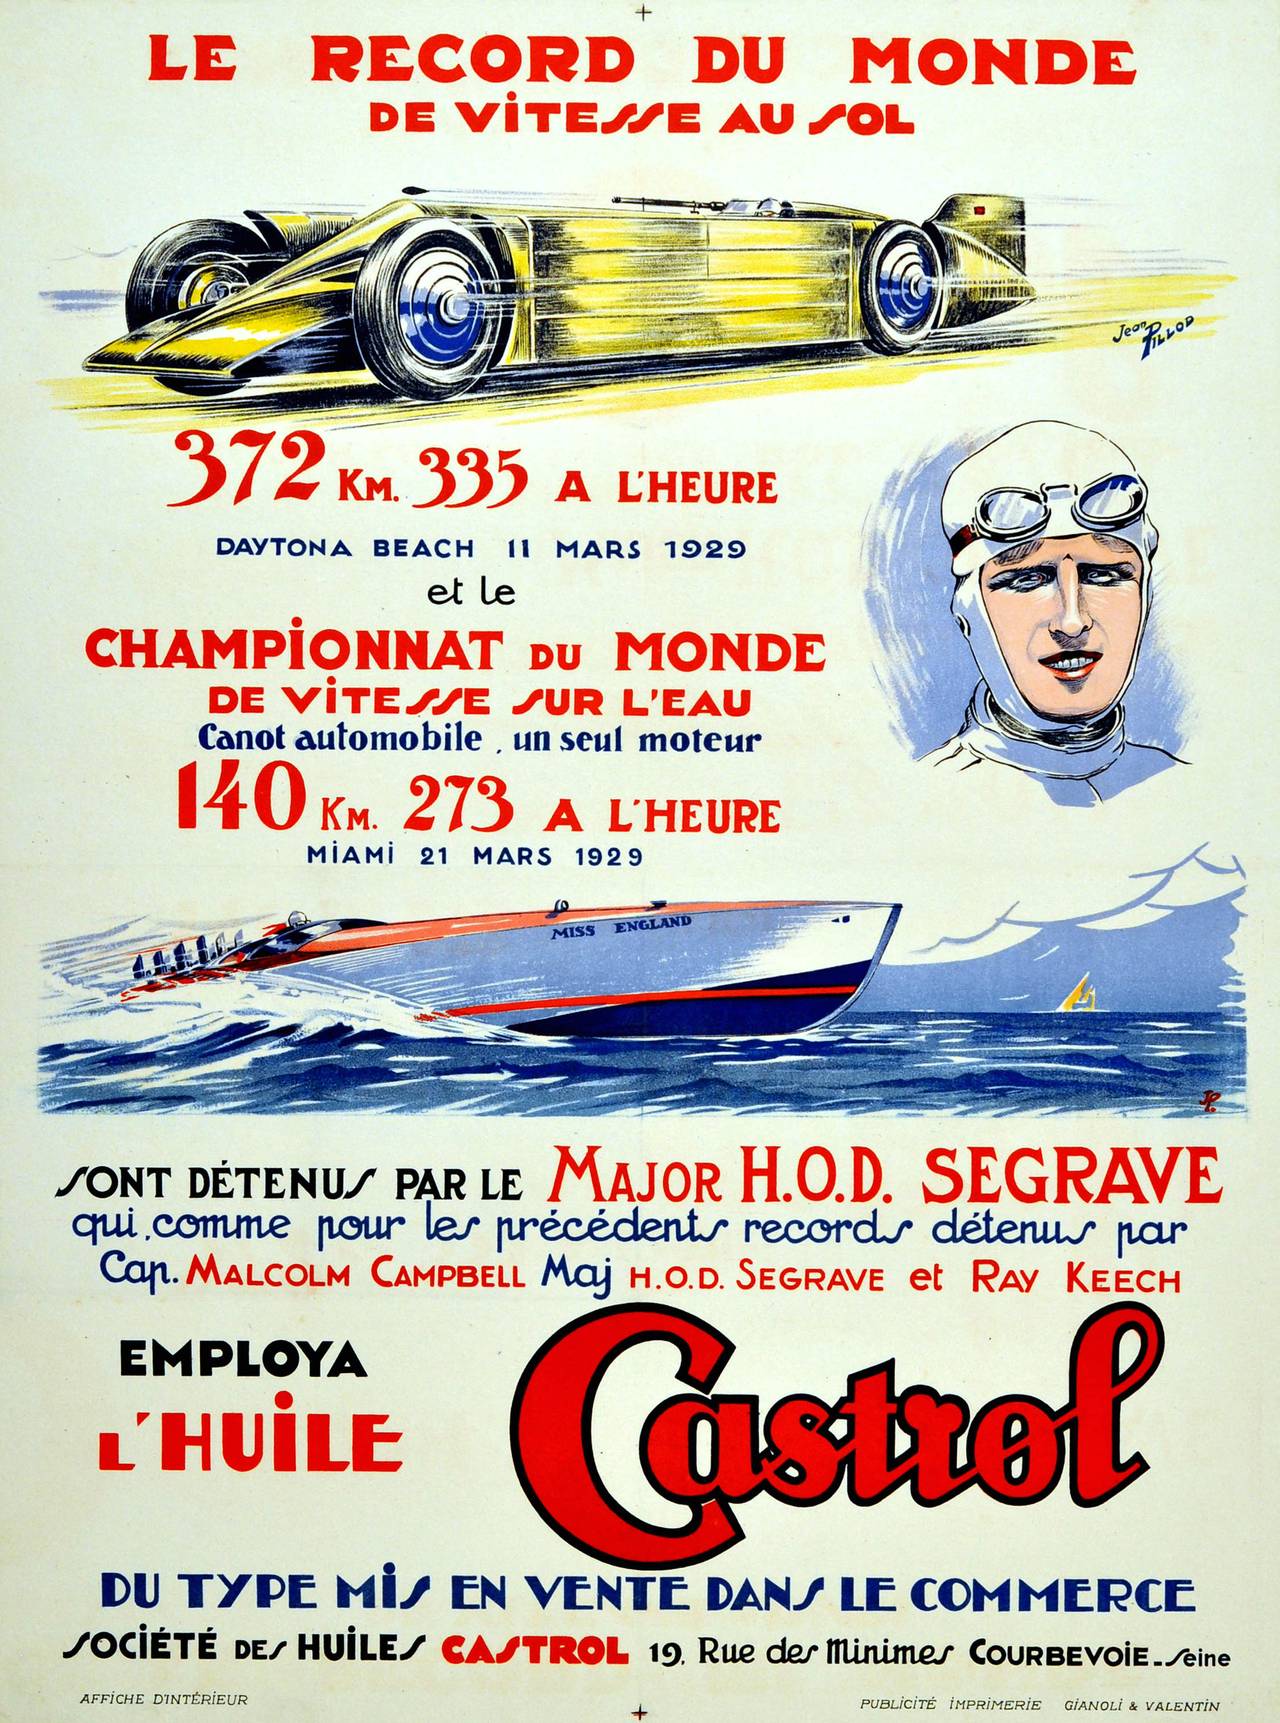 Jean Pillod Print - Original vintage poster issued by Castrol featuring Segrave's 1929 speed records